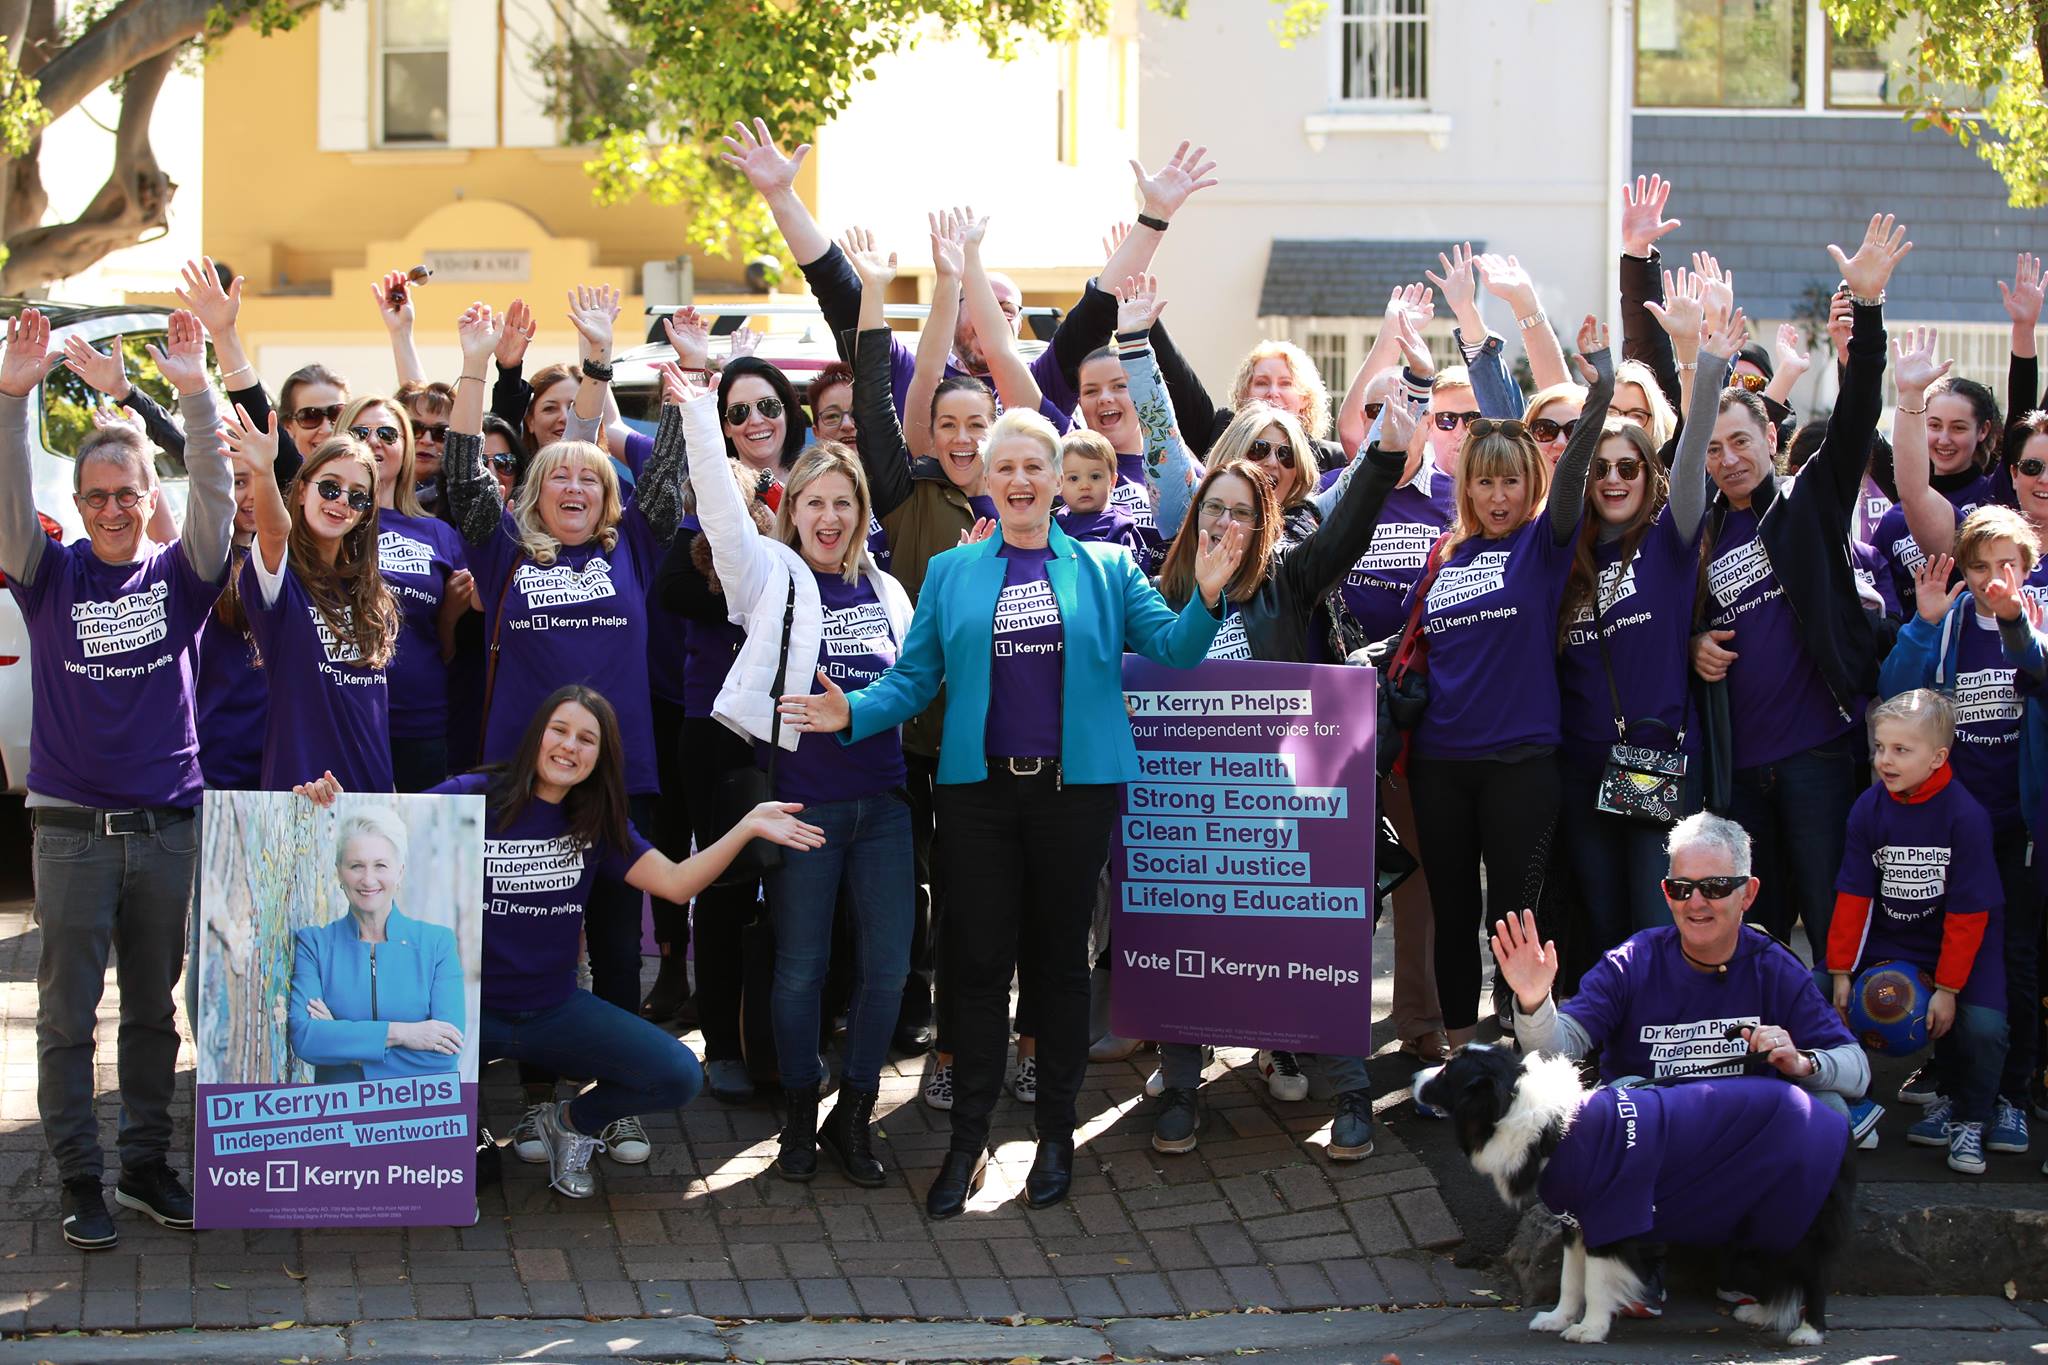 Kerryn Phelps backflips on preferences putting Liberal Party ahead of Labor